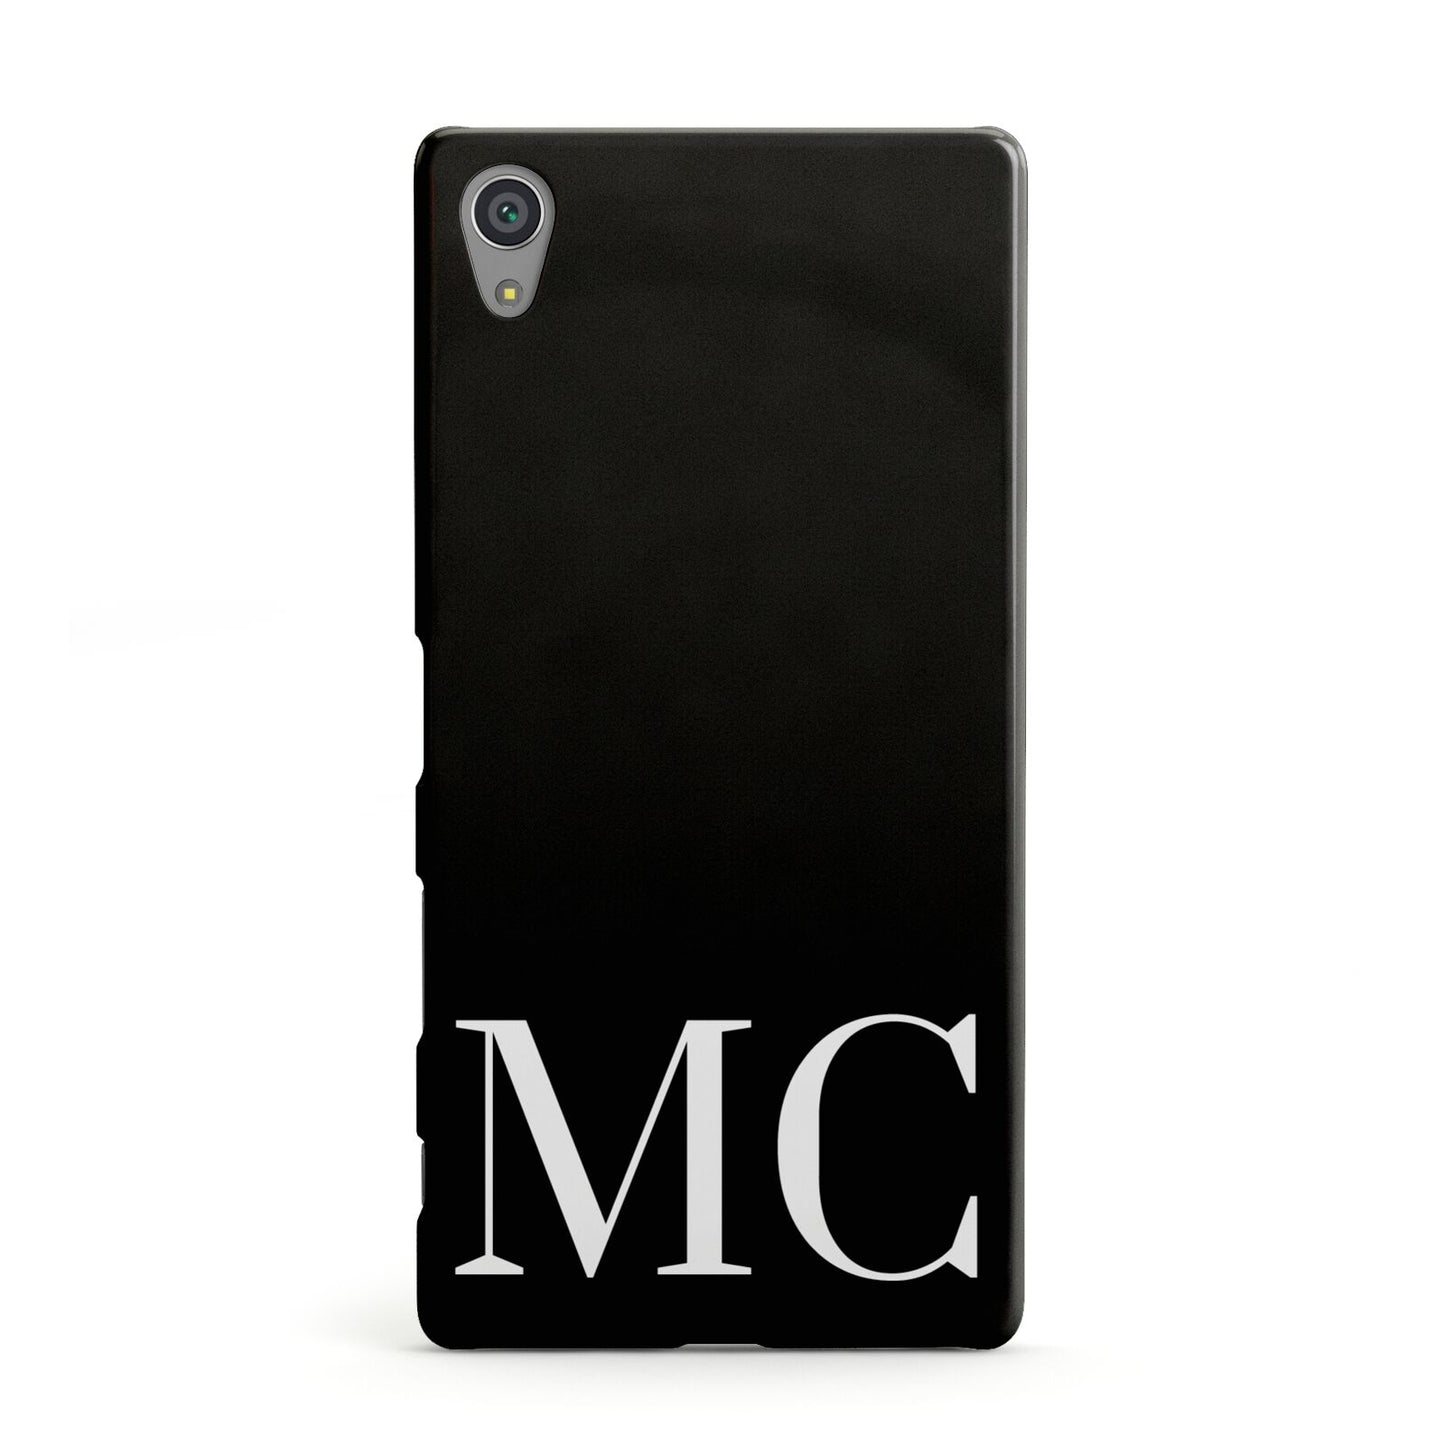 Initials Personalised 1 Sony Xperia Case